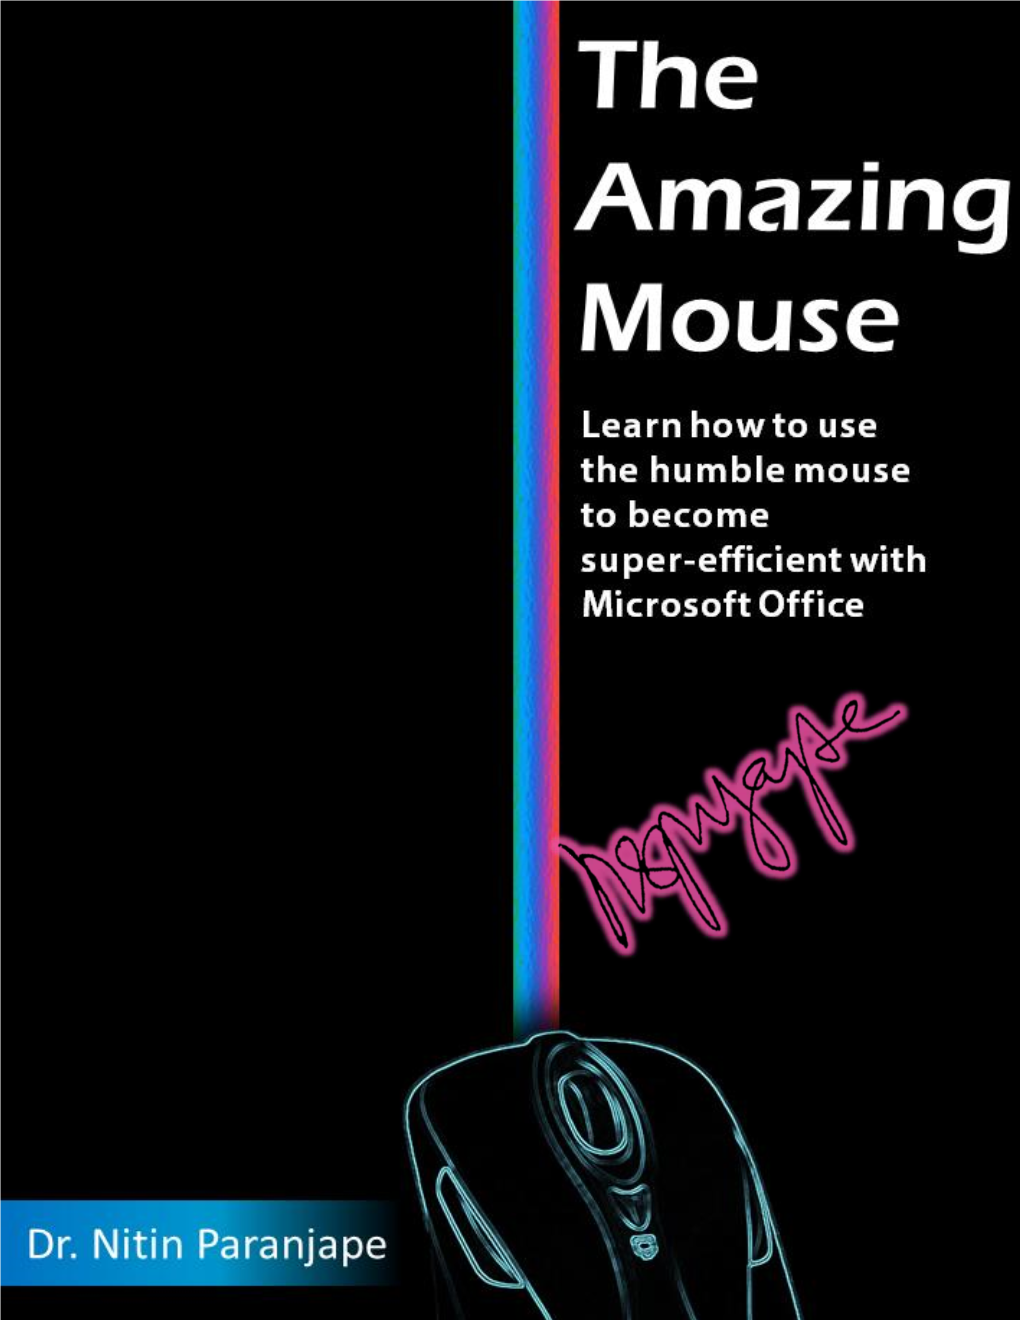 The Amazing Mouse